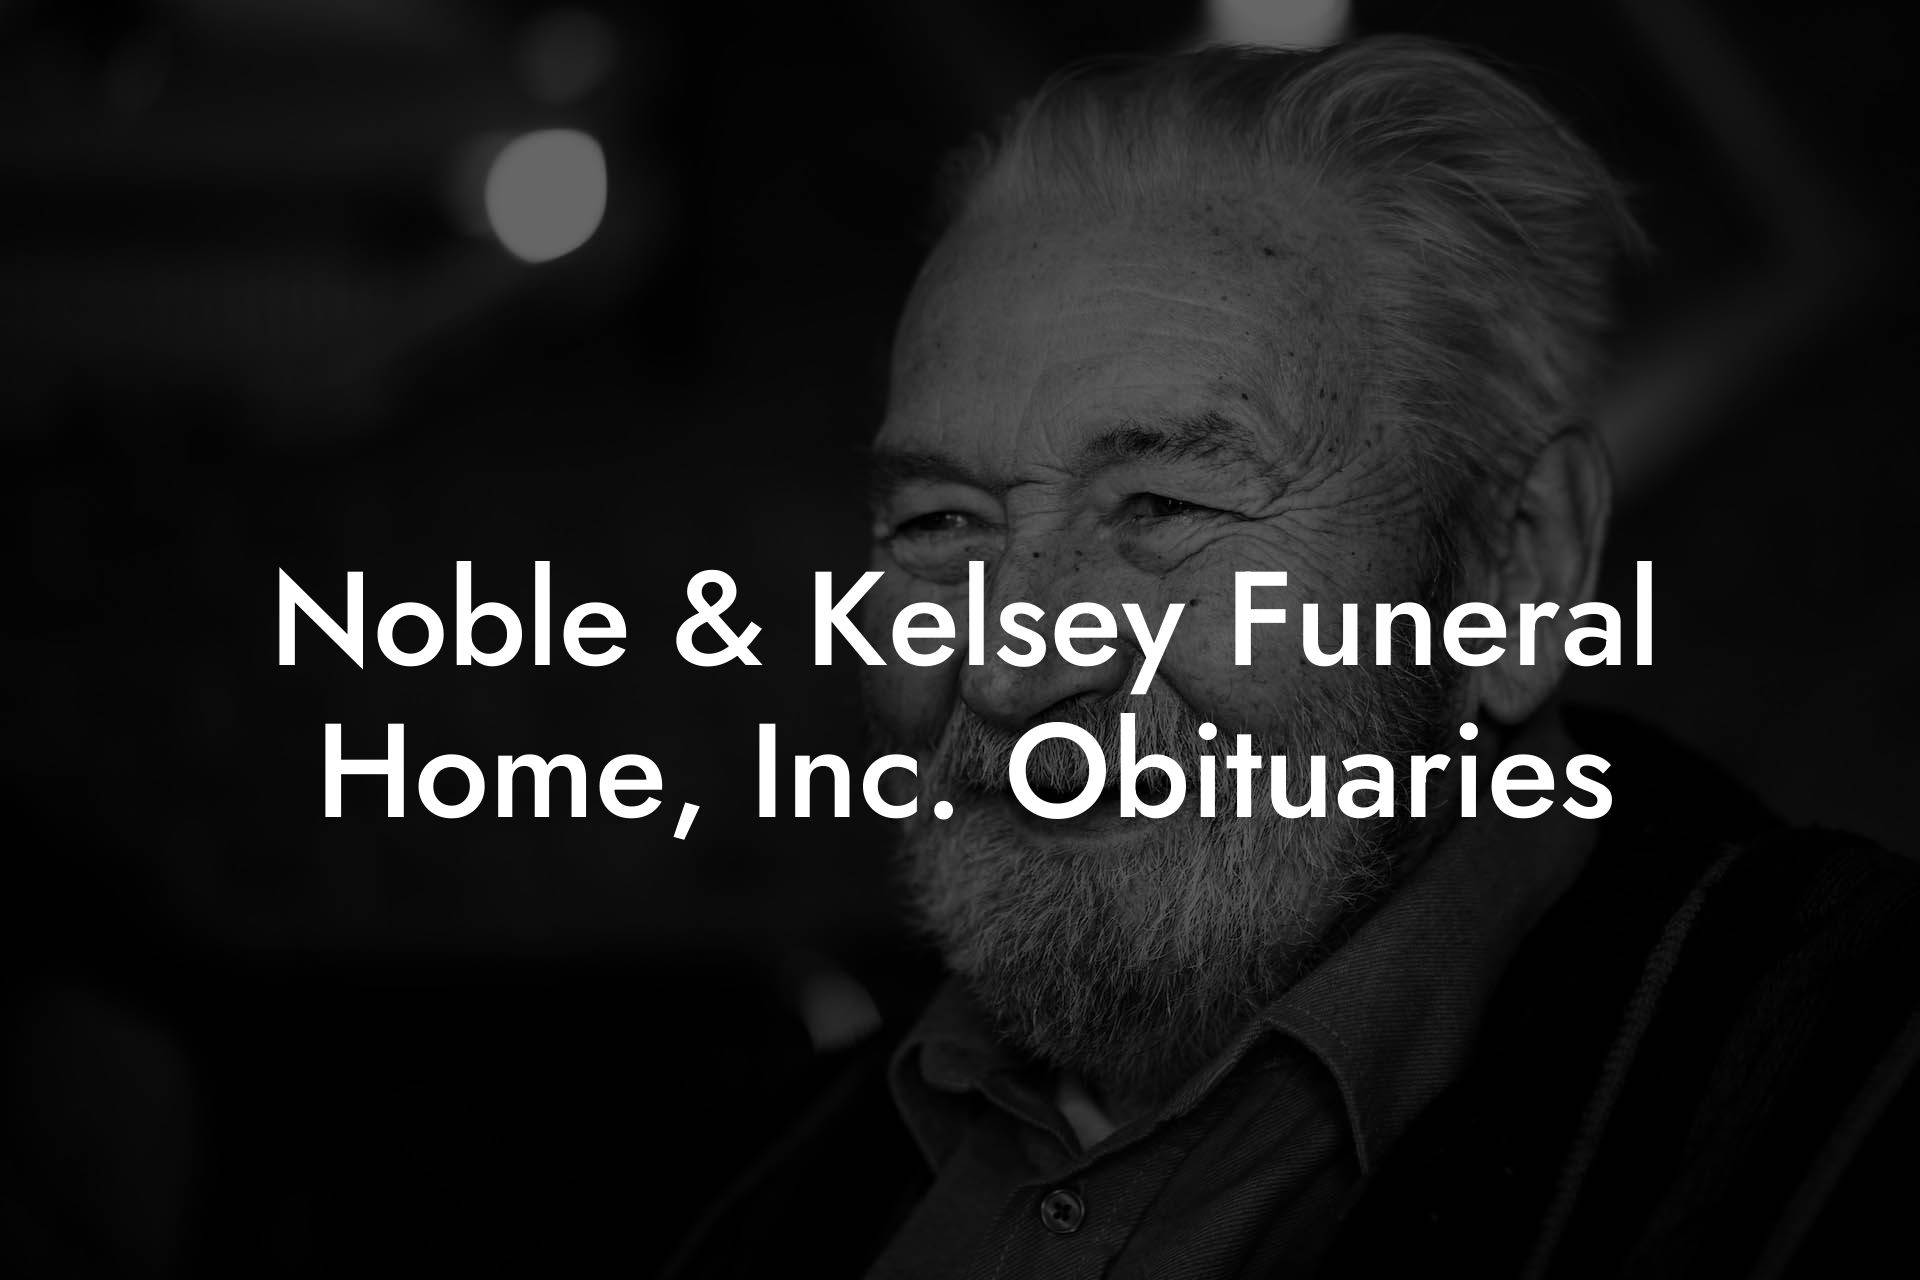 Noble & Kelsey Funeral Home, Inc. Obituaries